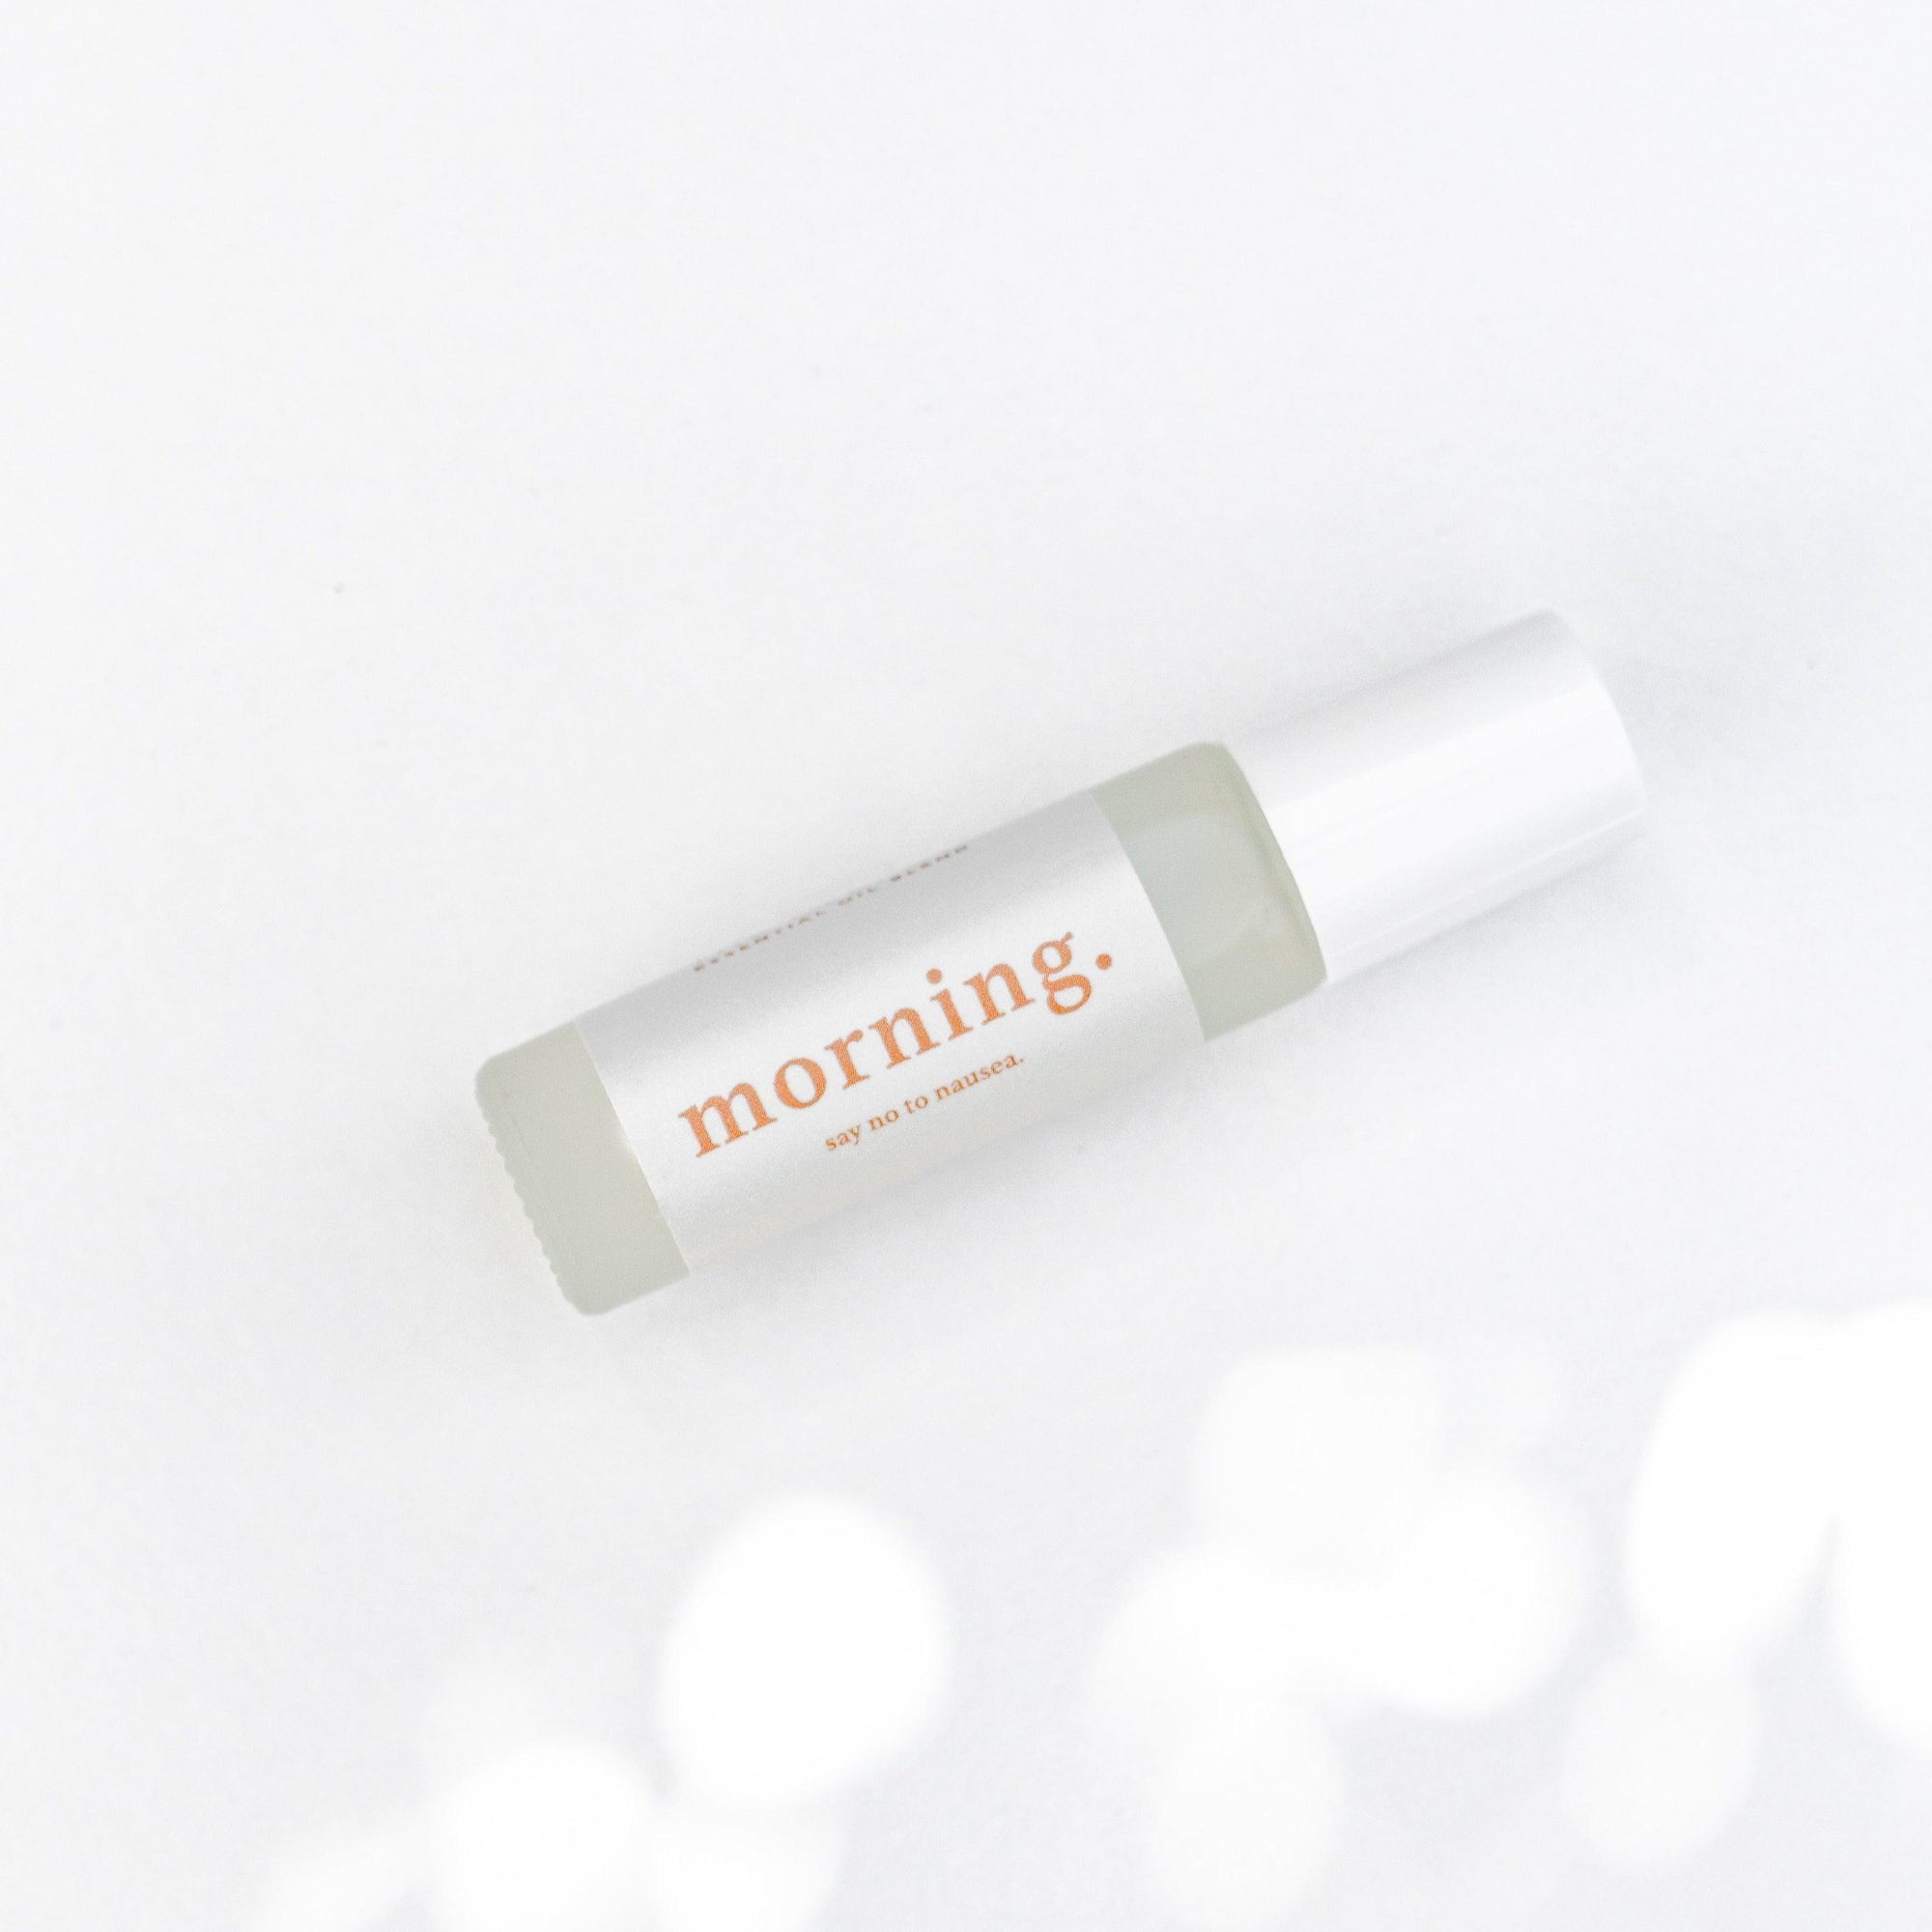 A bottle of Clē Naturals morning essential oil on a white surface.